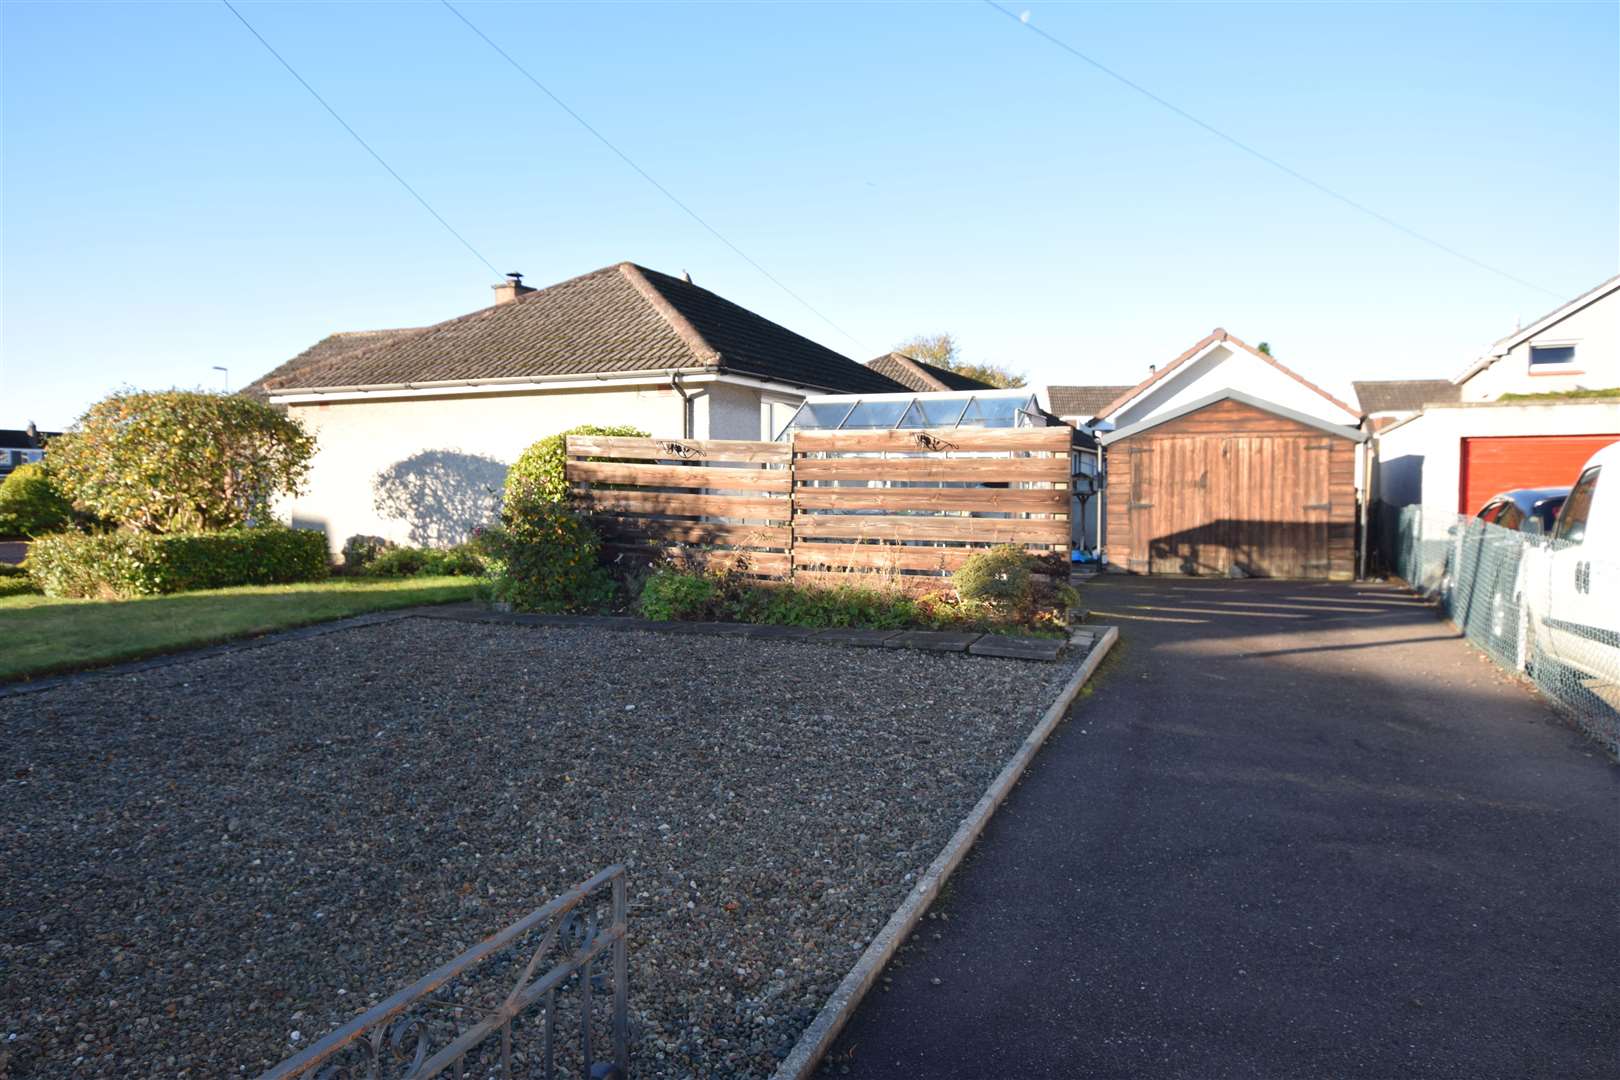 The property offers a detached single garage.